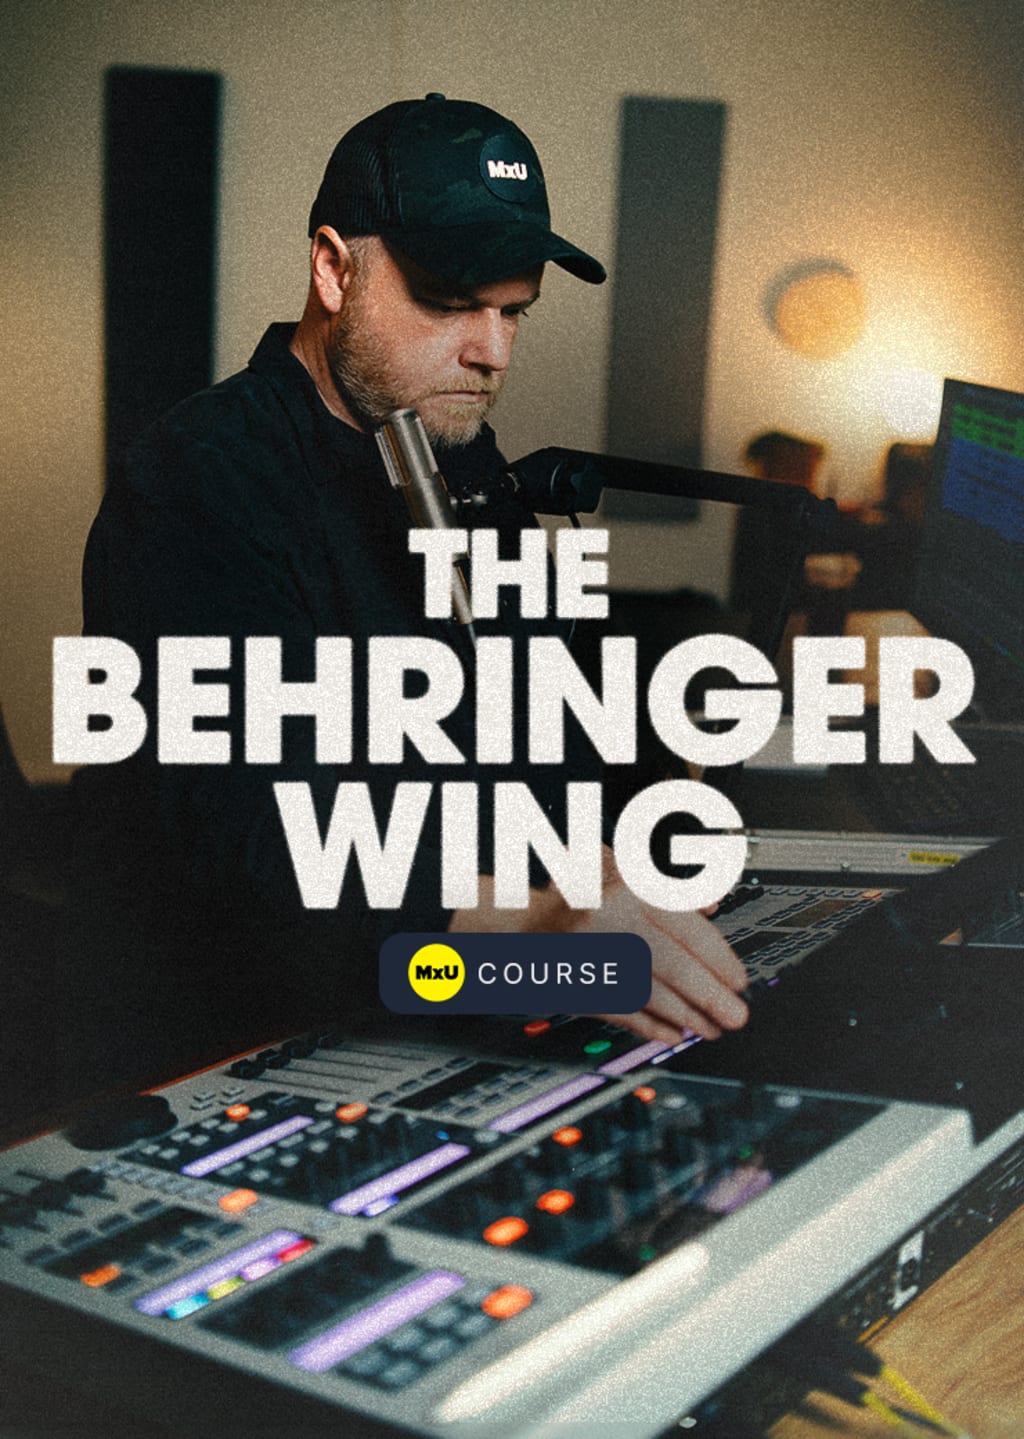 The Behringer WING